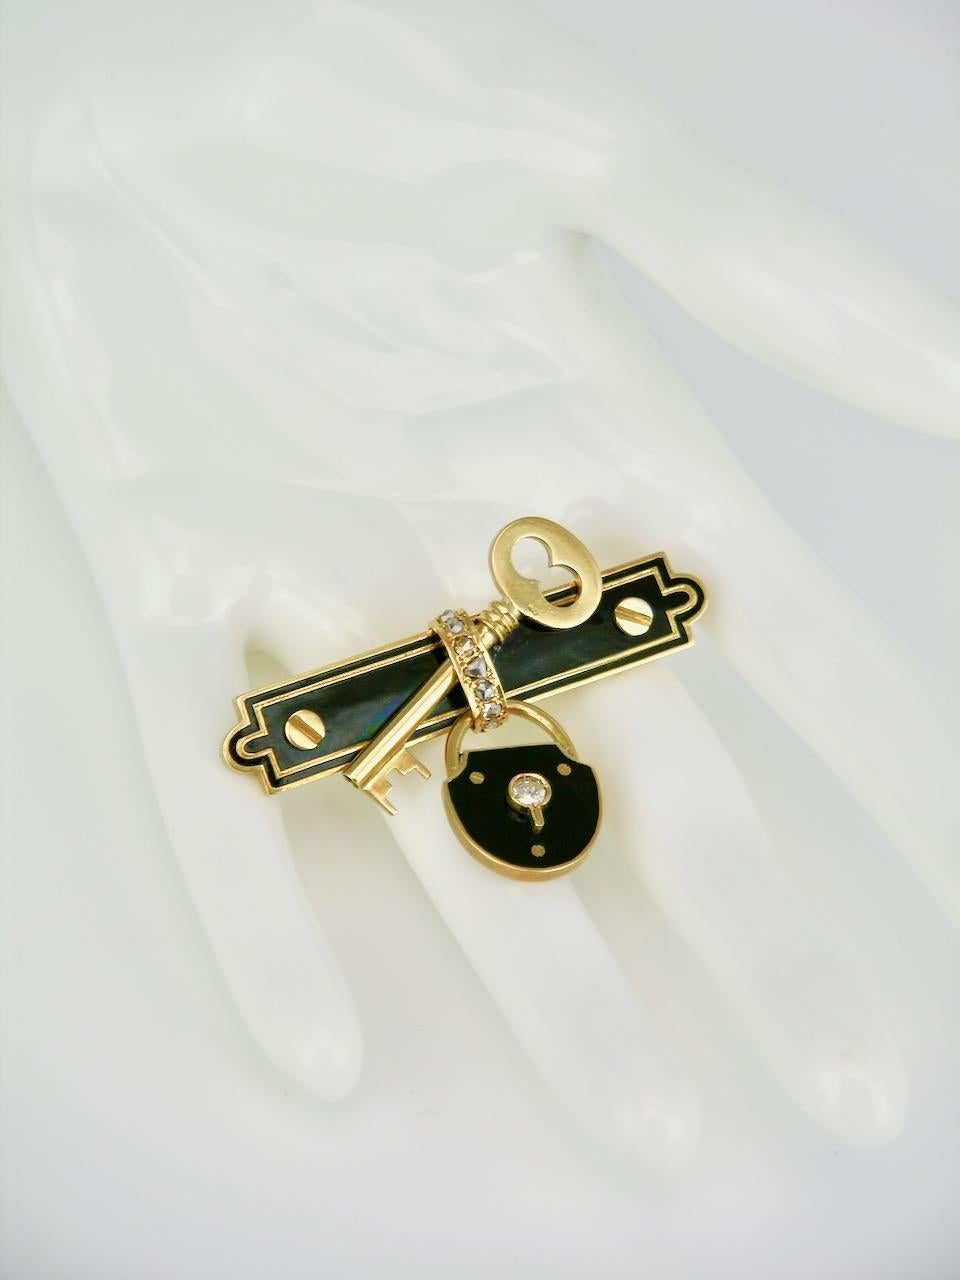 Antique 15 Karat Gold Diamond and Black Enamel Lock and Key Brooch Pin, 1880s In Good Condition For Sale In Sydney, NSW